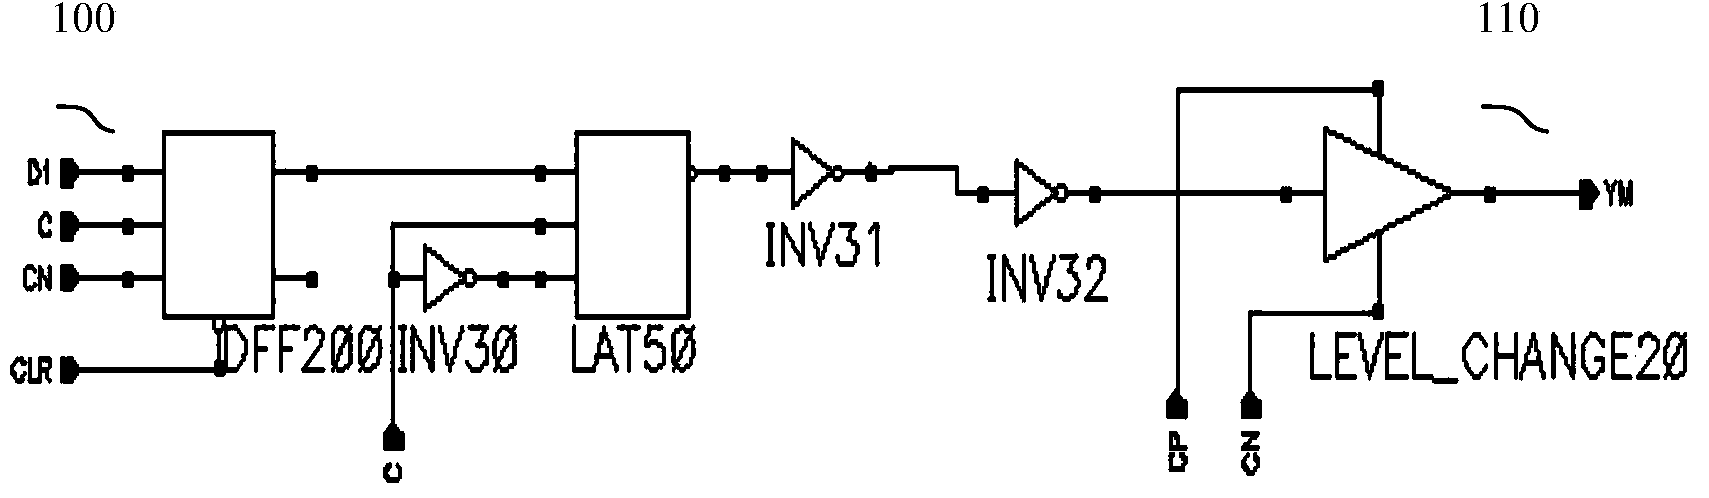 Programmed burning device for anti-fuse